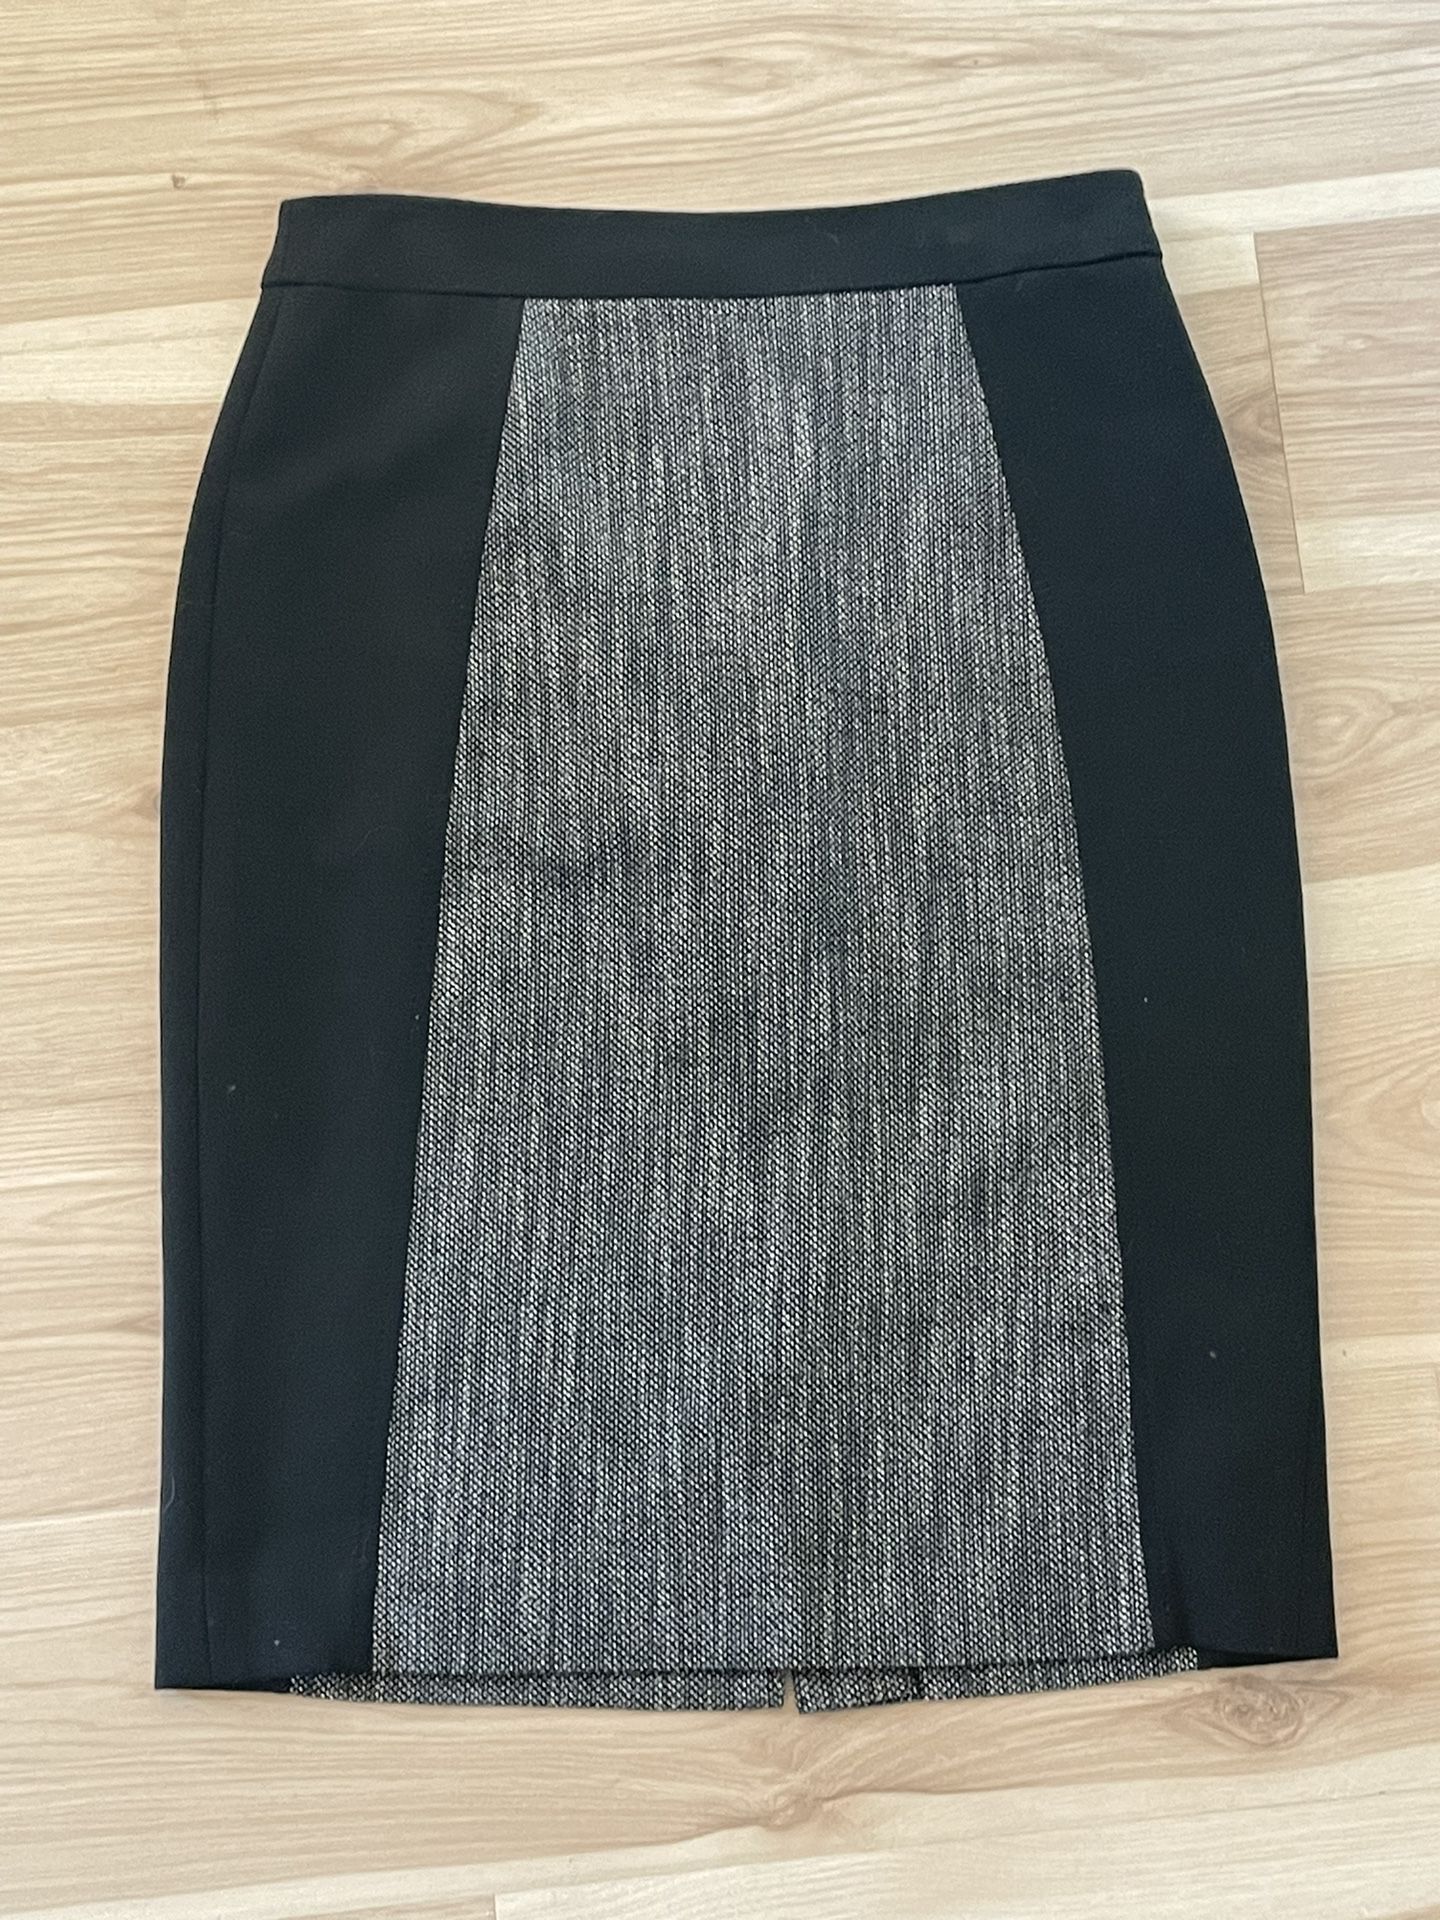 Halogen Women Skirt Black Panel Tweed Stretch Straight Pencil Lined Poly Sz 0